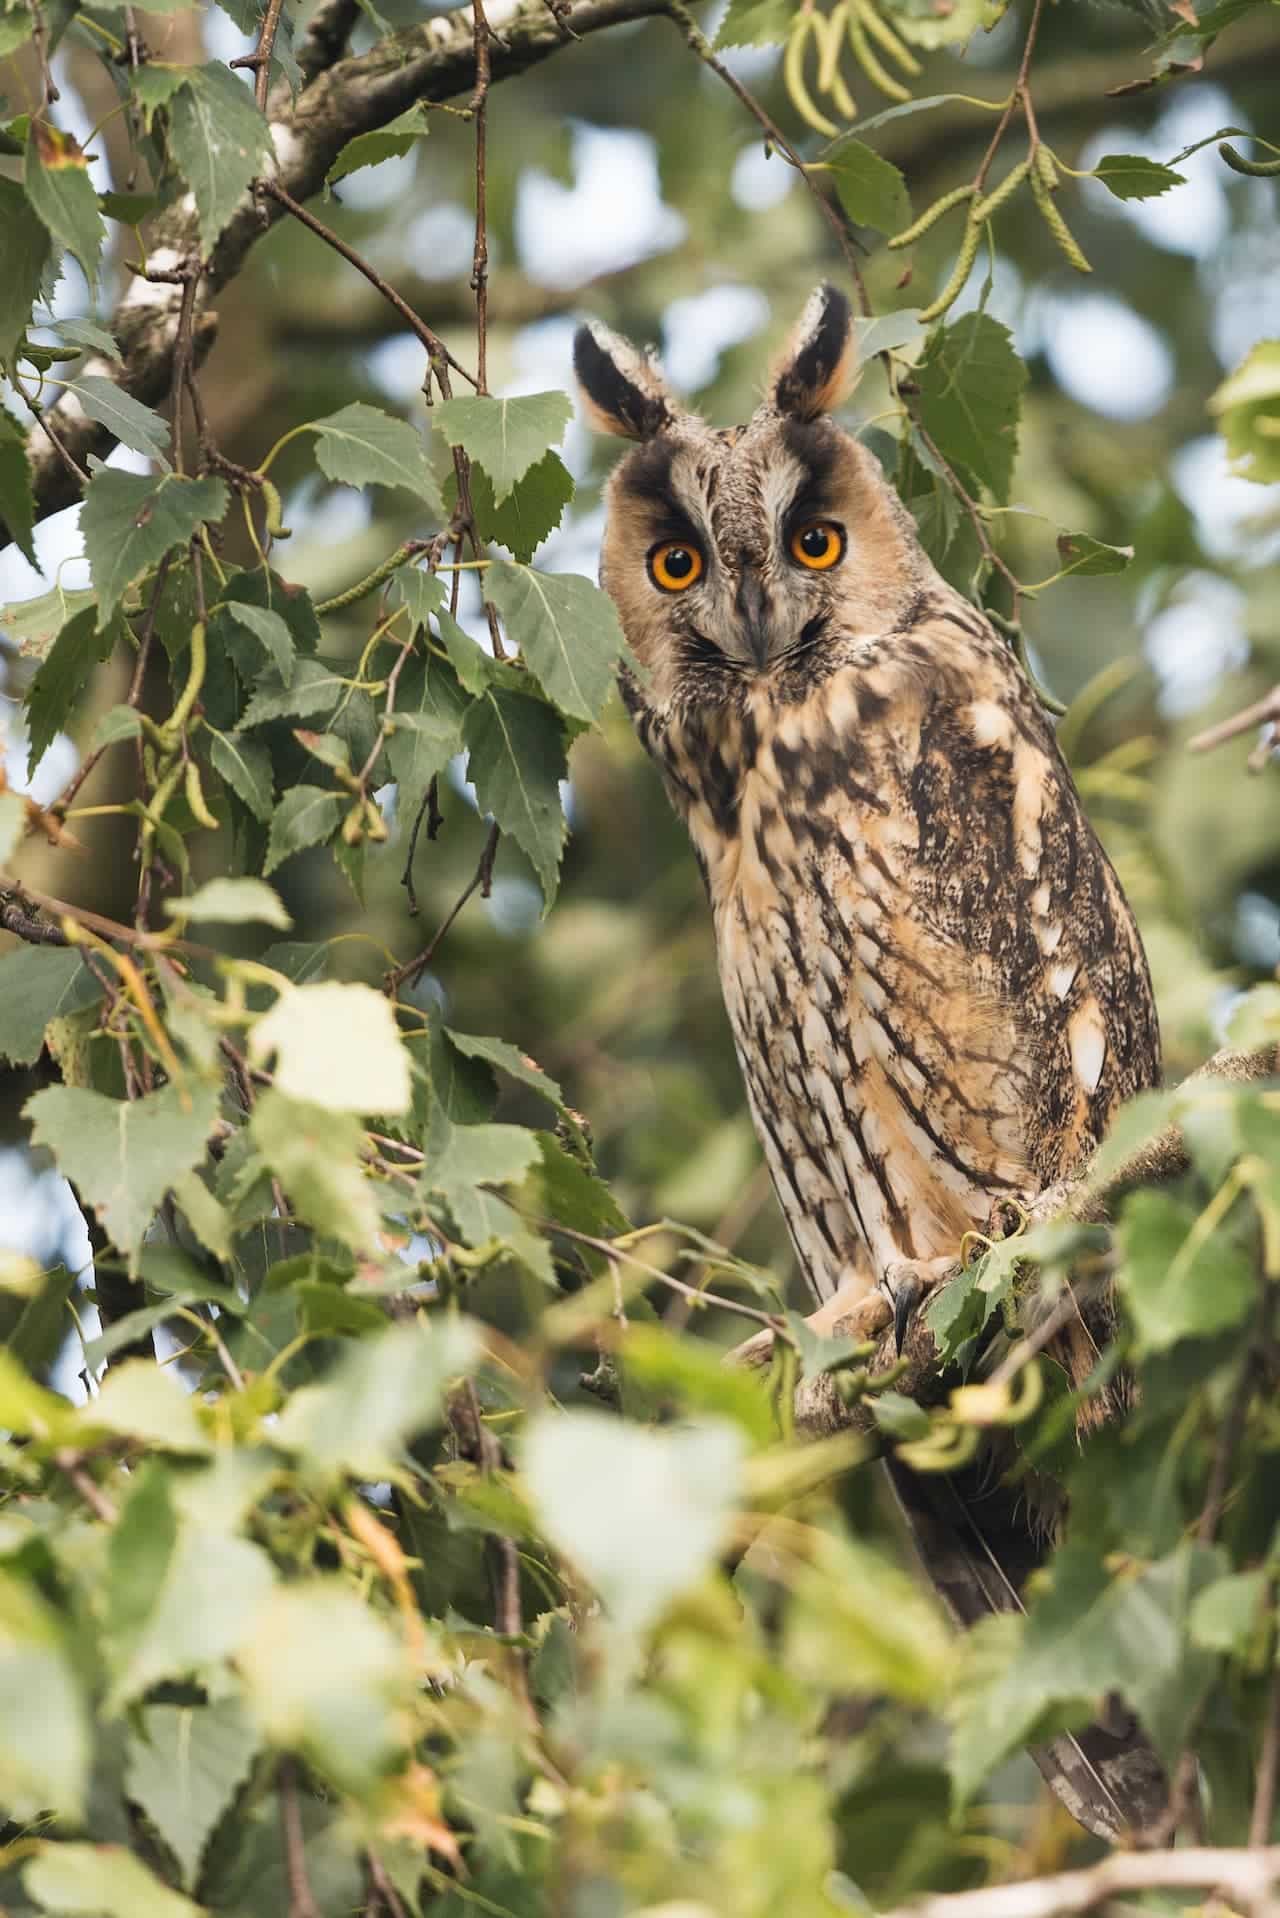 The Long Eared Owl Is Resting In The Branch Of Woods With Lots Of Leaves